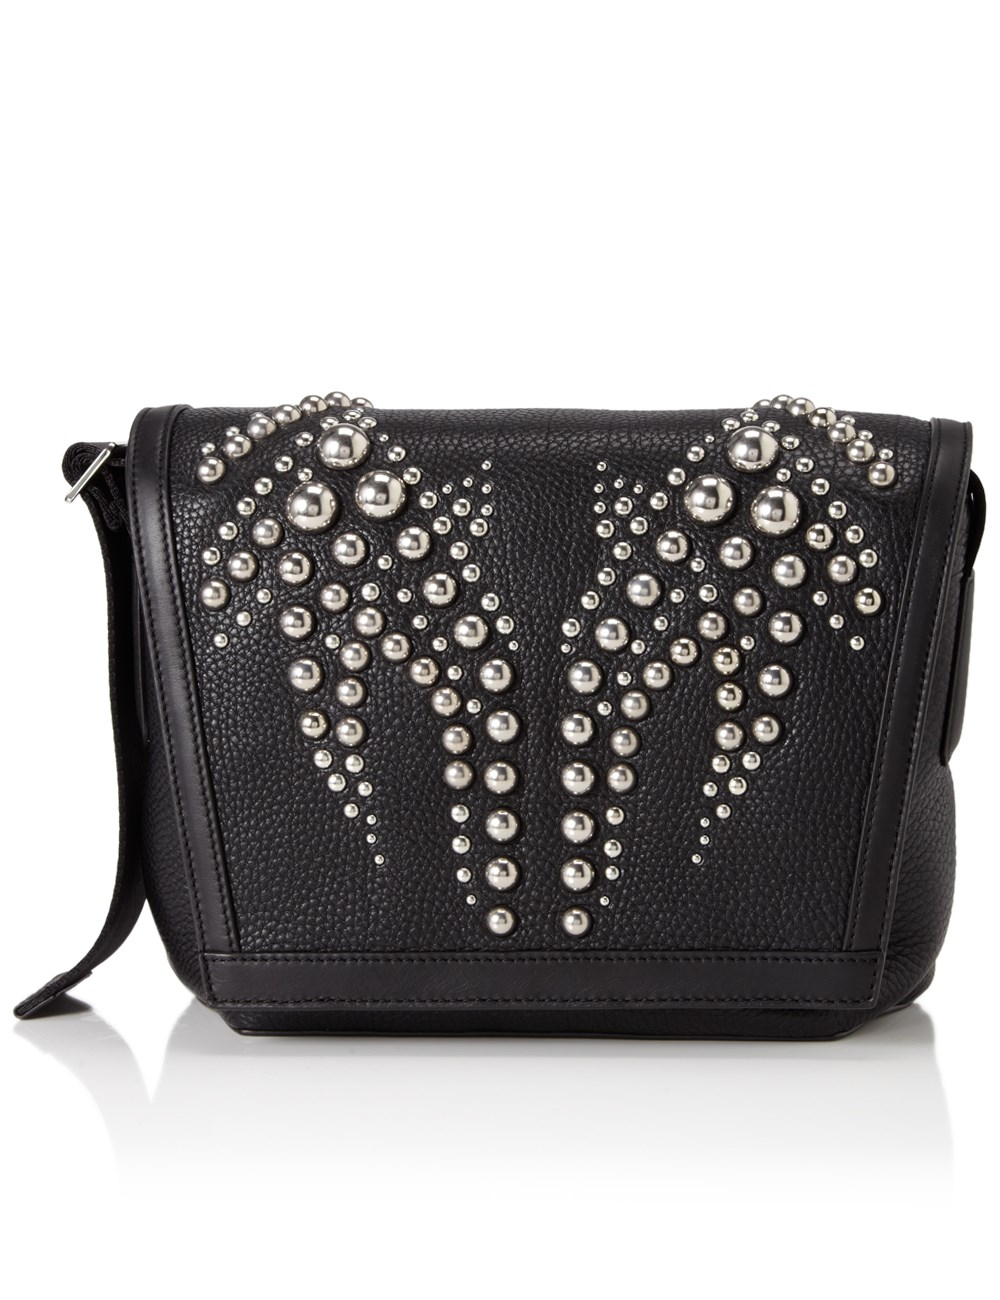 Alexander wang Black Leather Studded Courier Bag in Black | Lyst